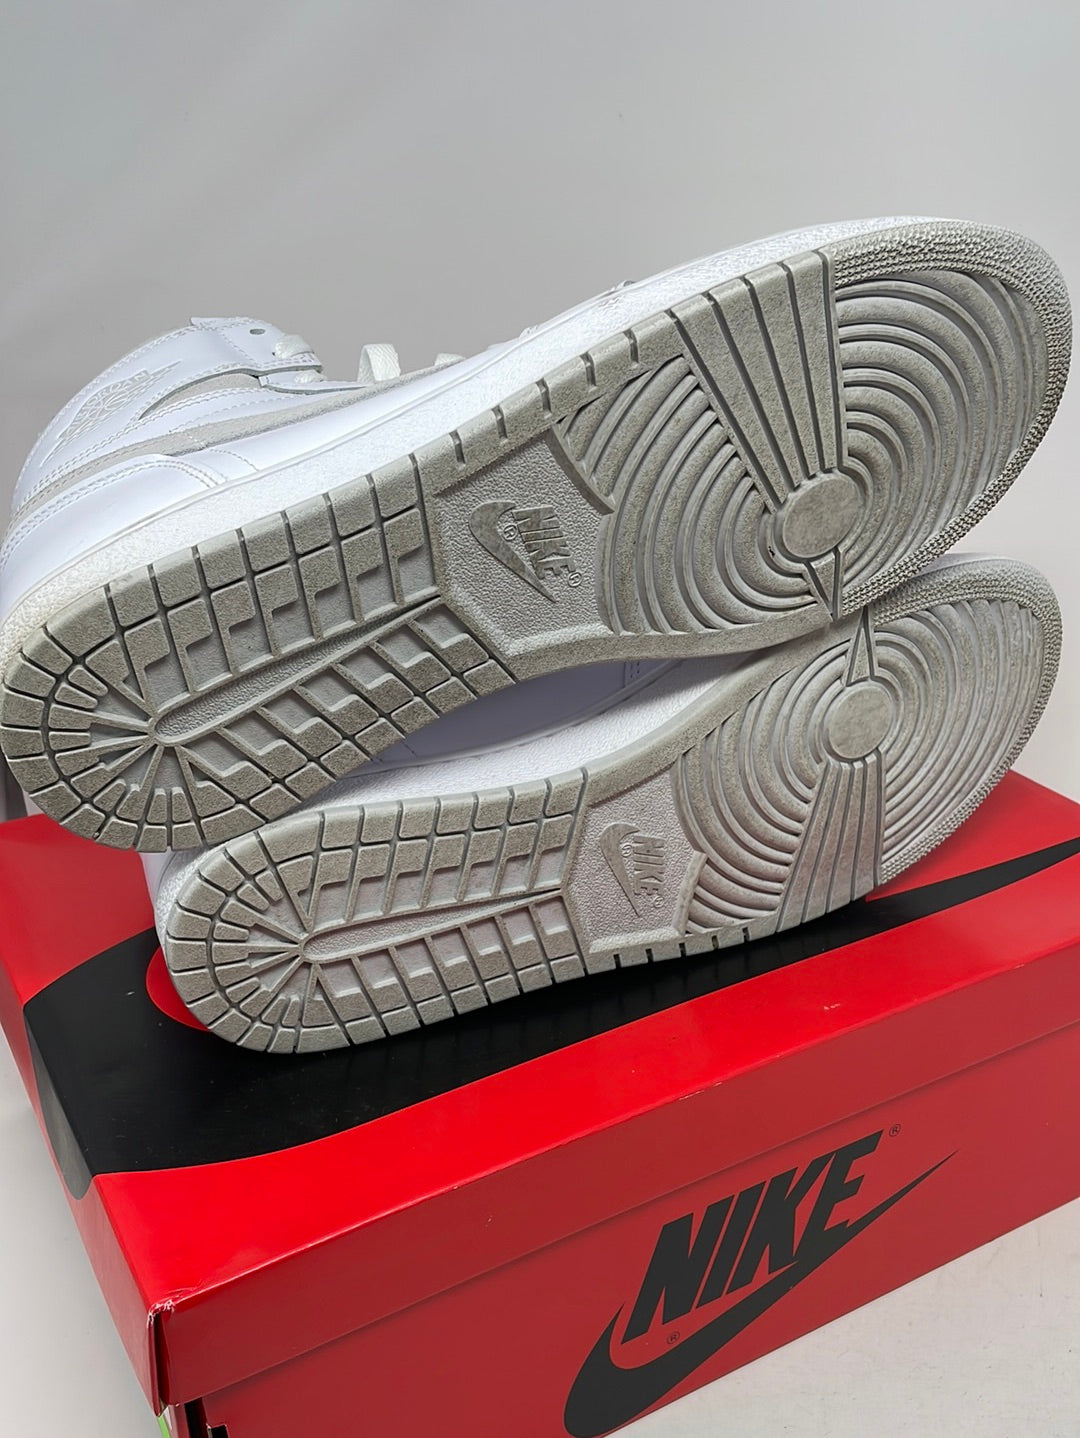 Load image into Gallery viewer, Preowned Jordan 1 Retro High 85 Neutral Grey Sz 14M/15.5W
